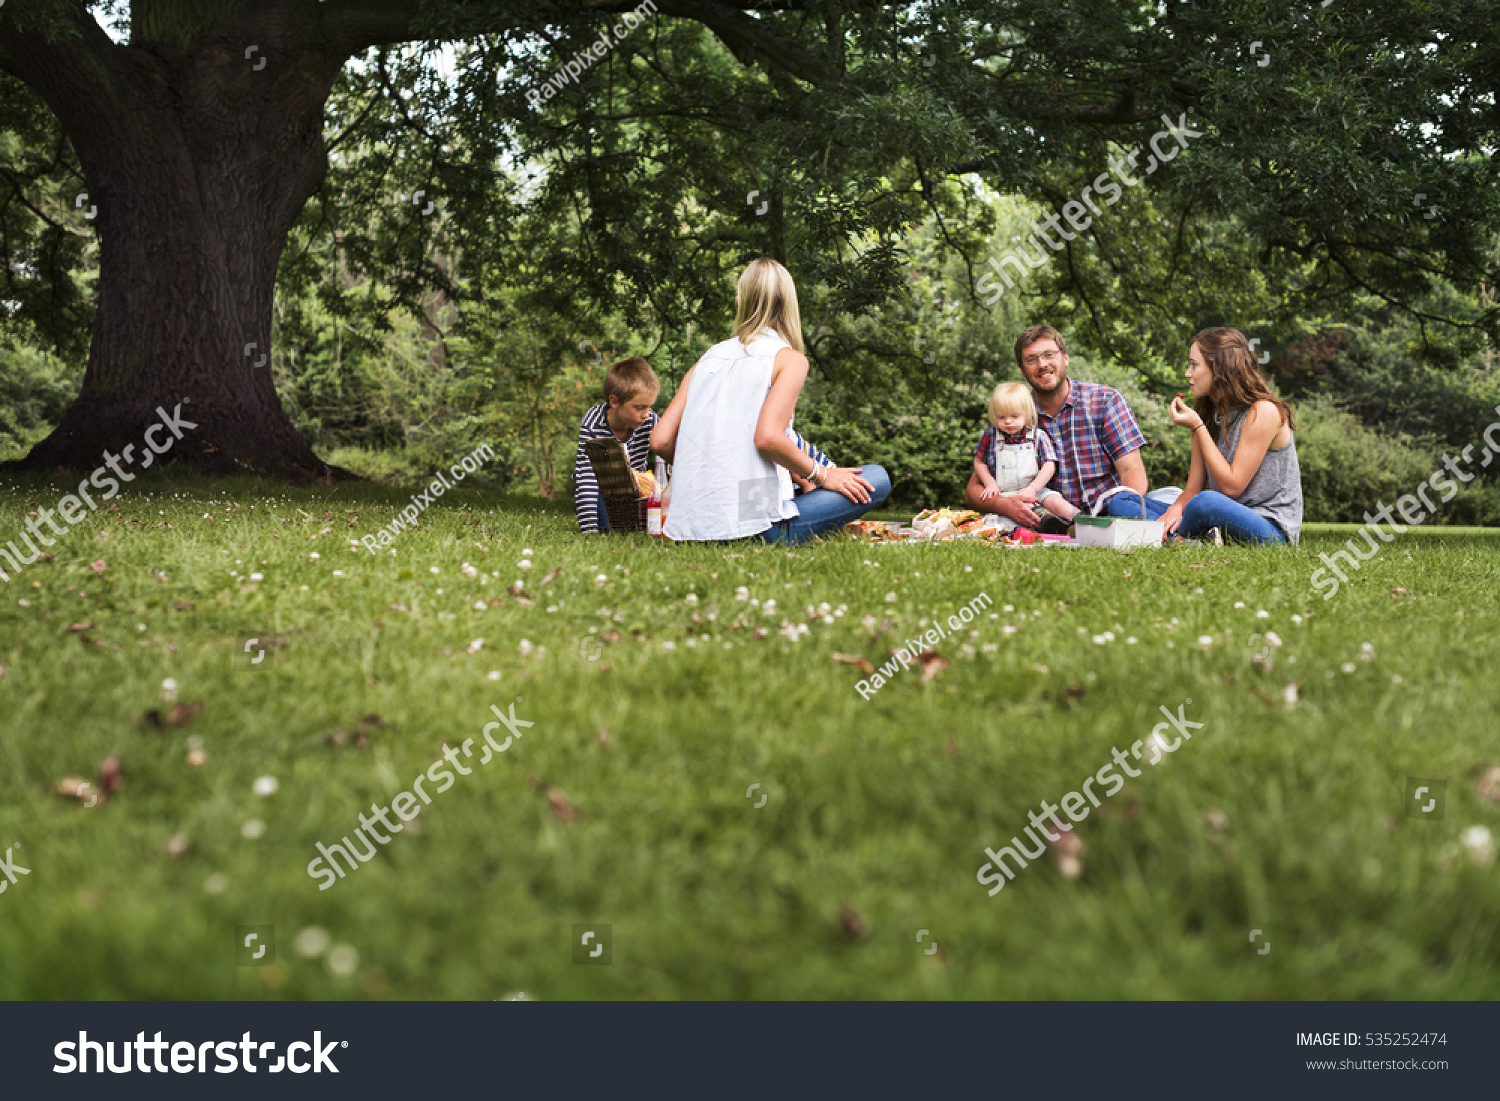 Family Generations Picnic Togetherness Relaxation Concept #535252474